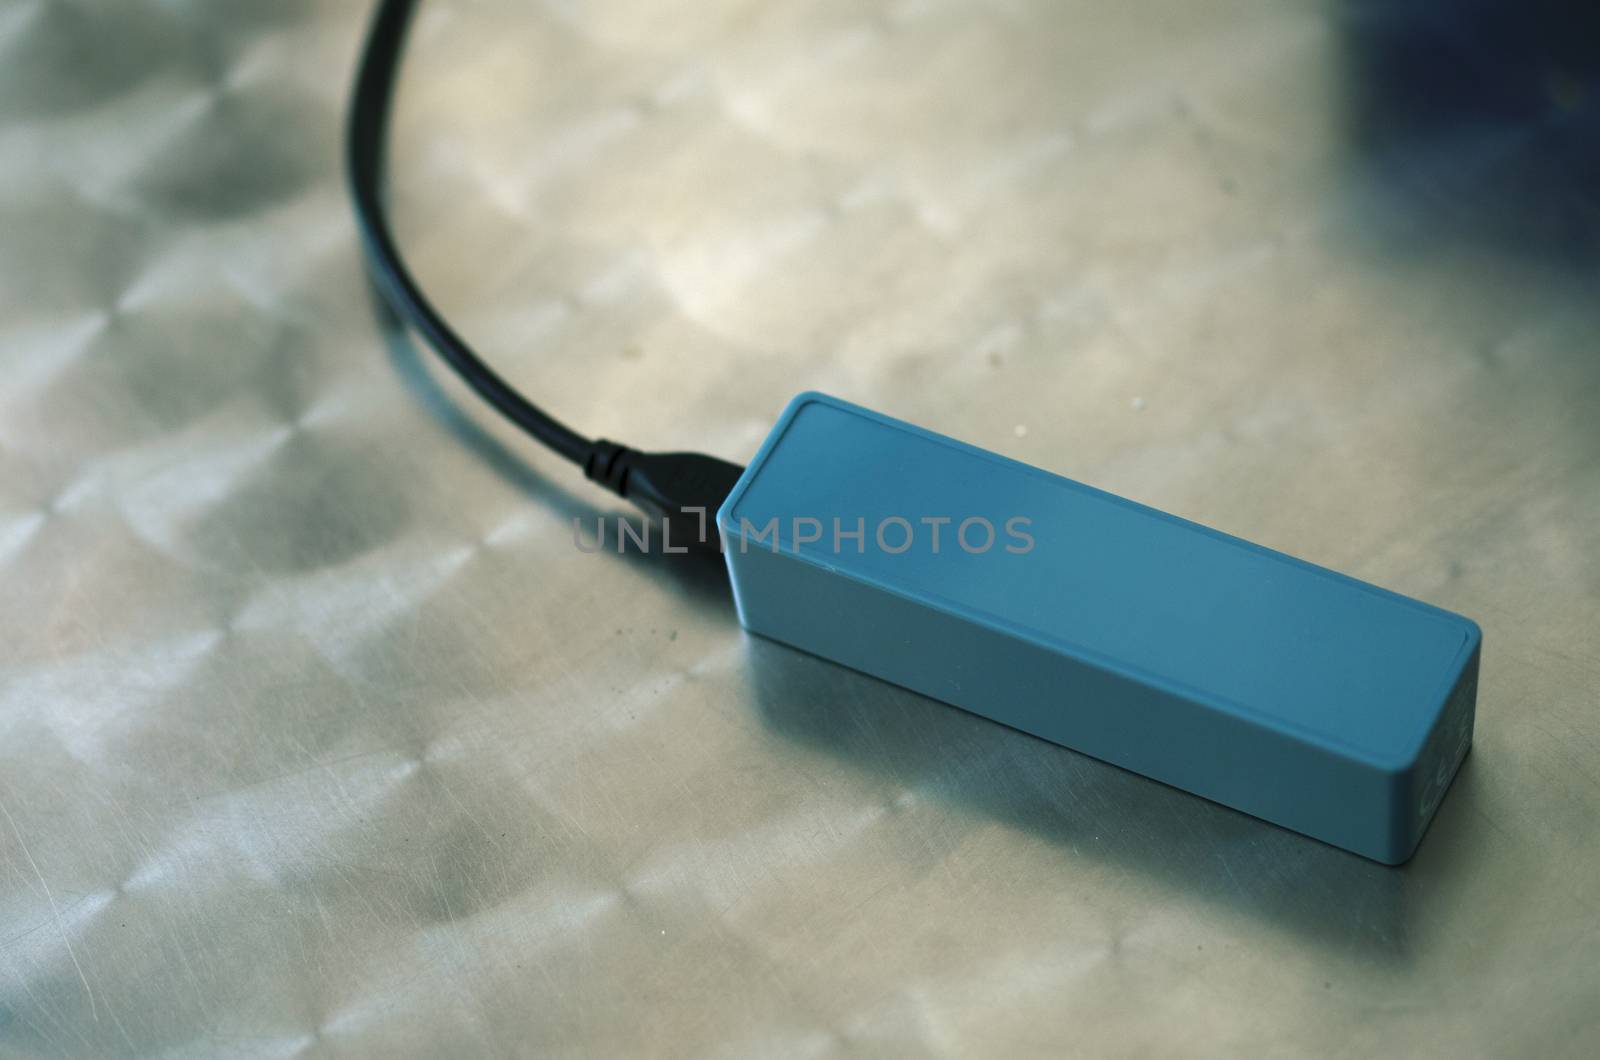 COLOR PHOTO OF CHARGING PORTABLE BATTERY POWER BANK CHARGER